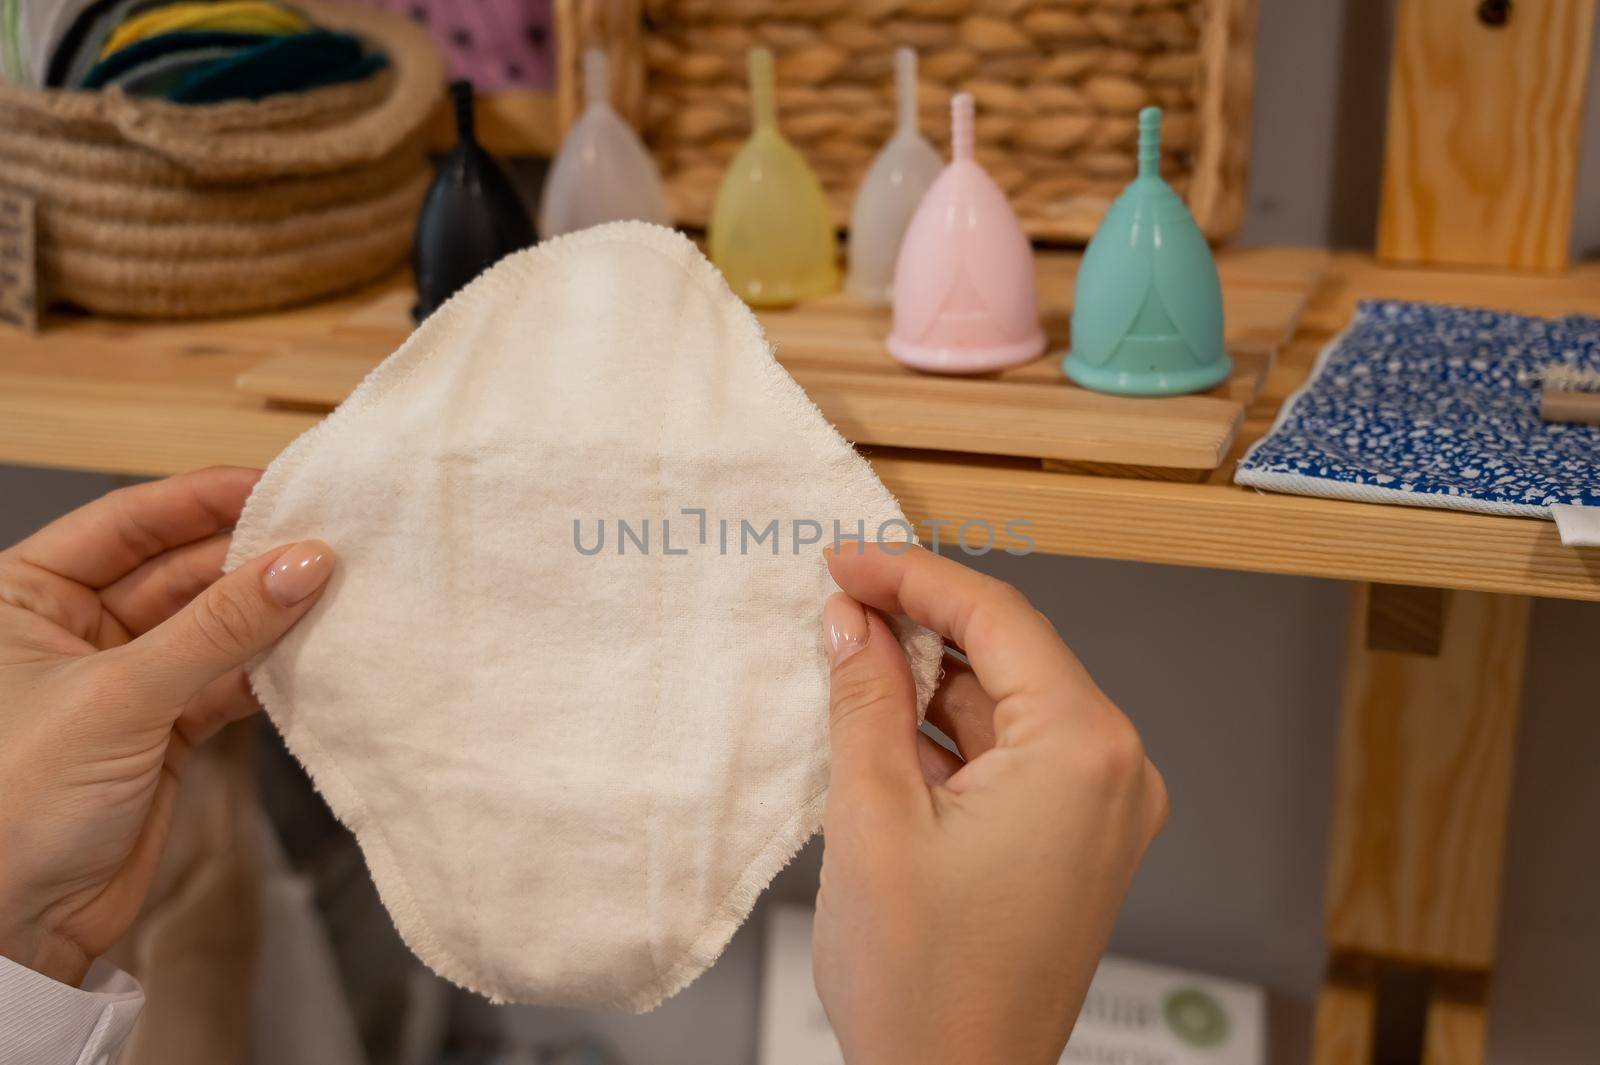 A woman in an eco store chooses a reusable pad. Intimate hygiene products.